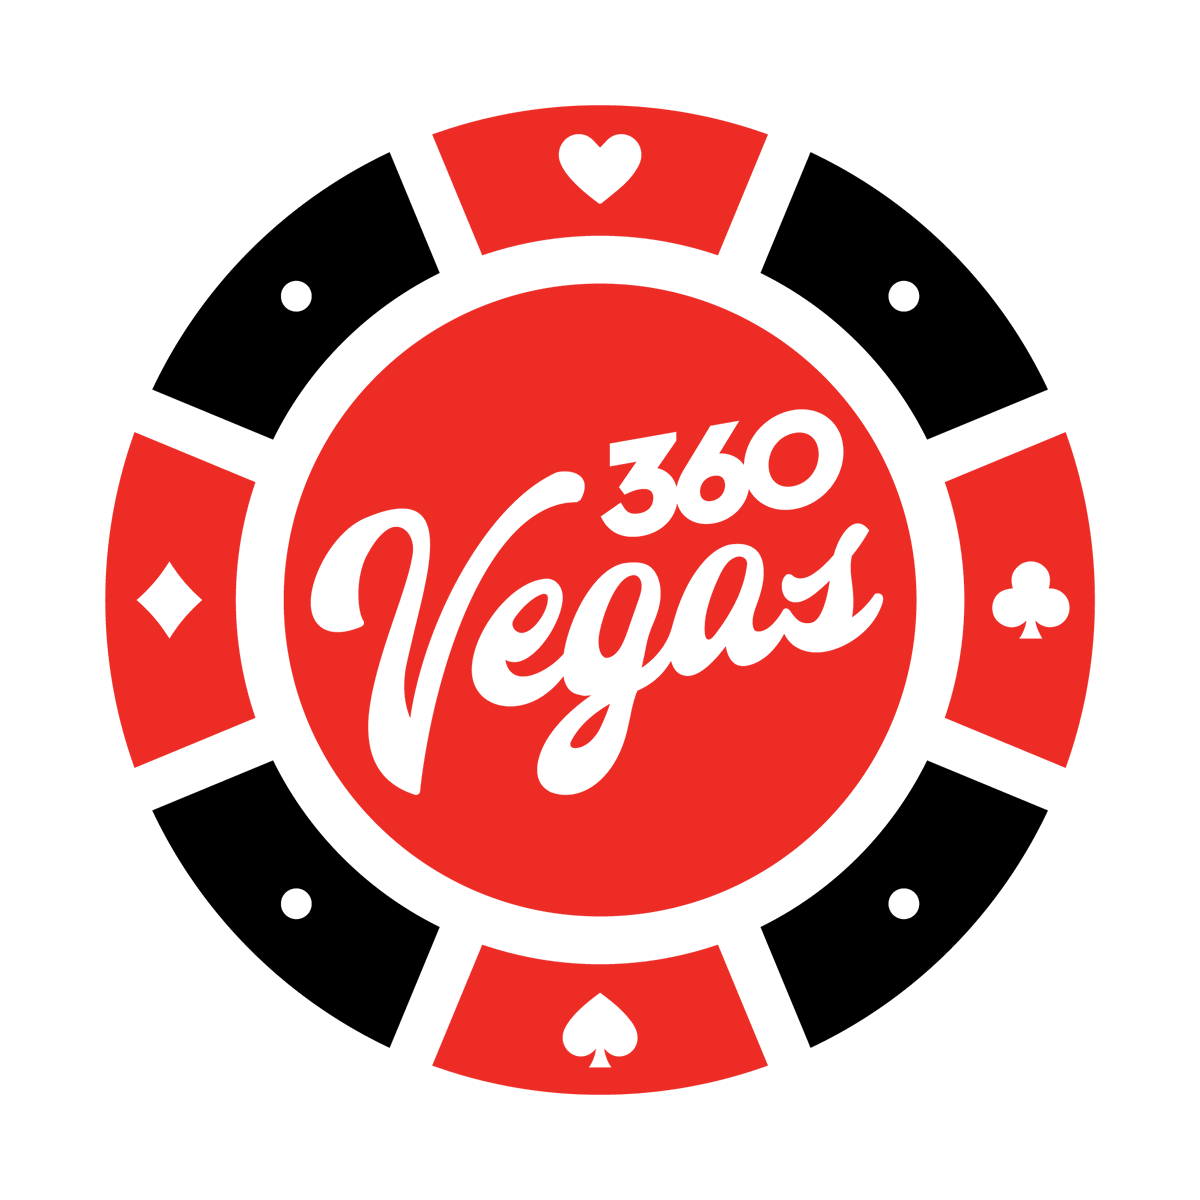 We are thrilled to announce that the next video in our '360 POV' series featuring the Martin Scorsese film 'Casino' E-9 pt.1: 'TV News Backdrops' is now available, EXCLUSIVELY to subscribers at Patreon.com/360Vegas 

Thank you for supporting what we do

#360VIP #360POV